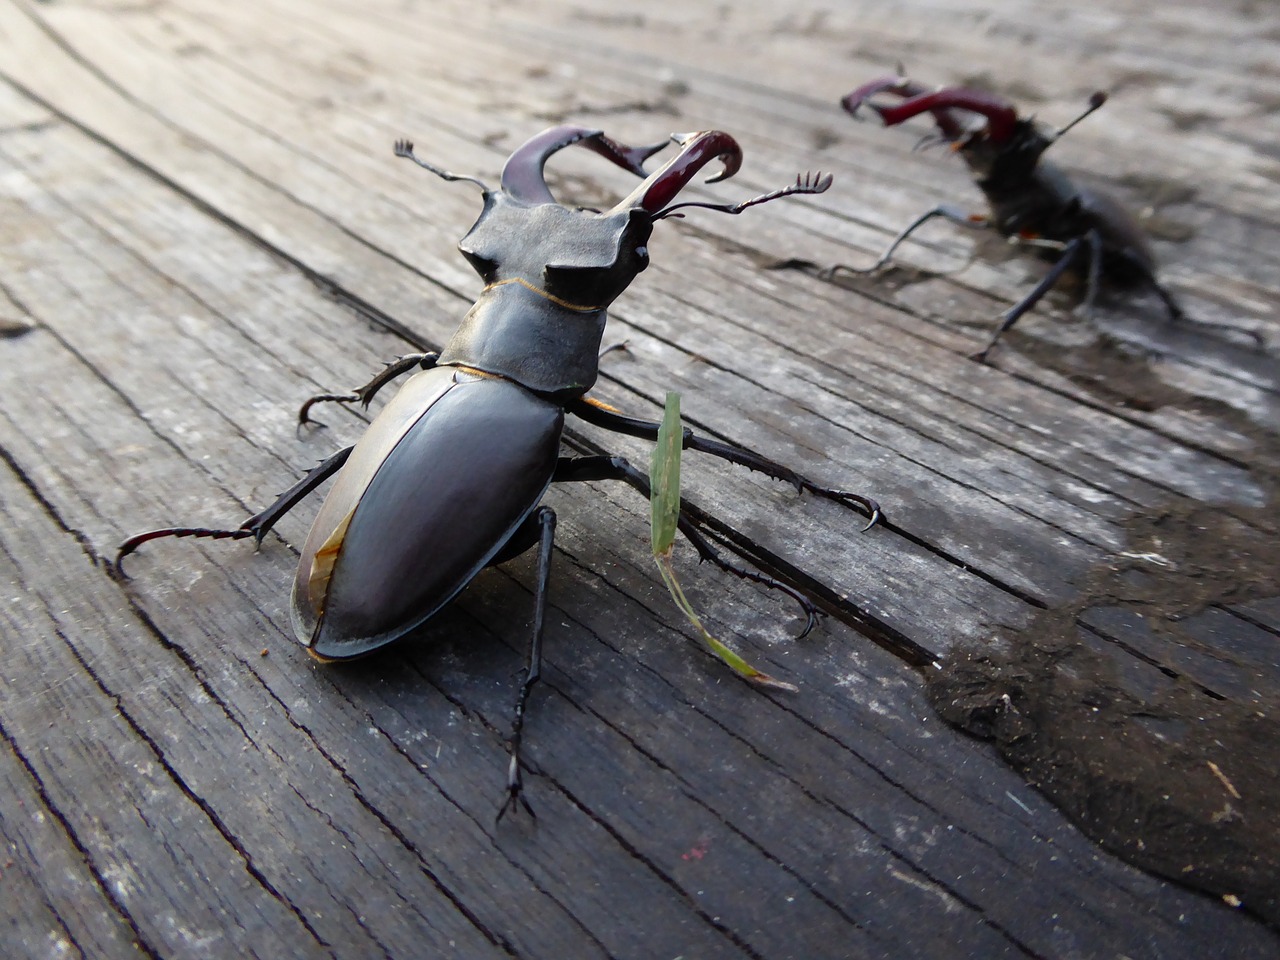 stag beetle fight insect free photo